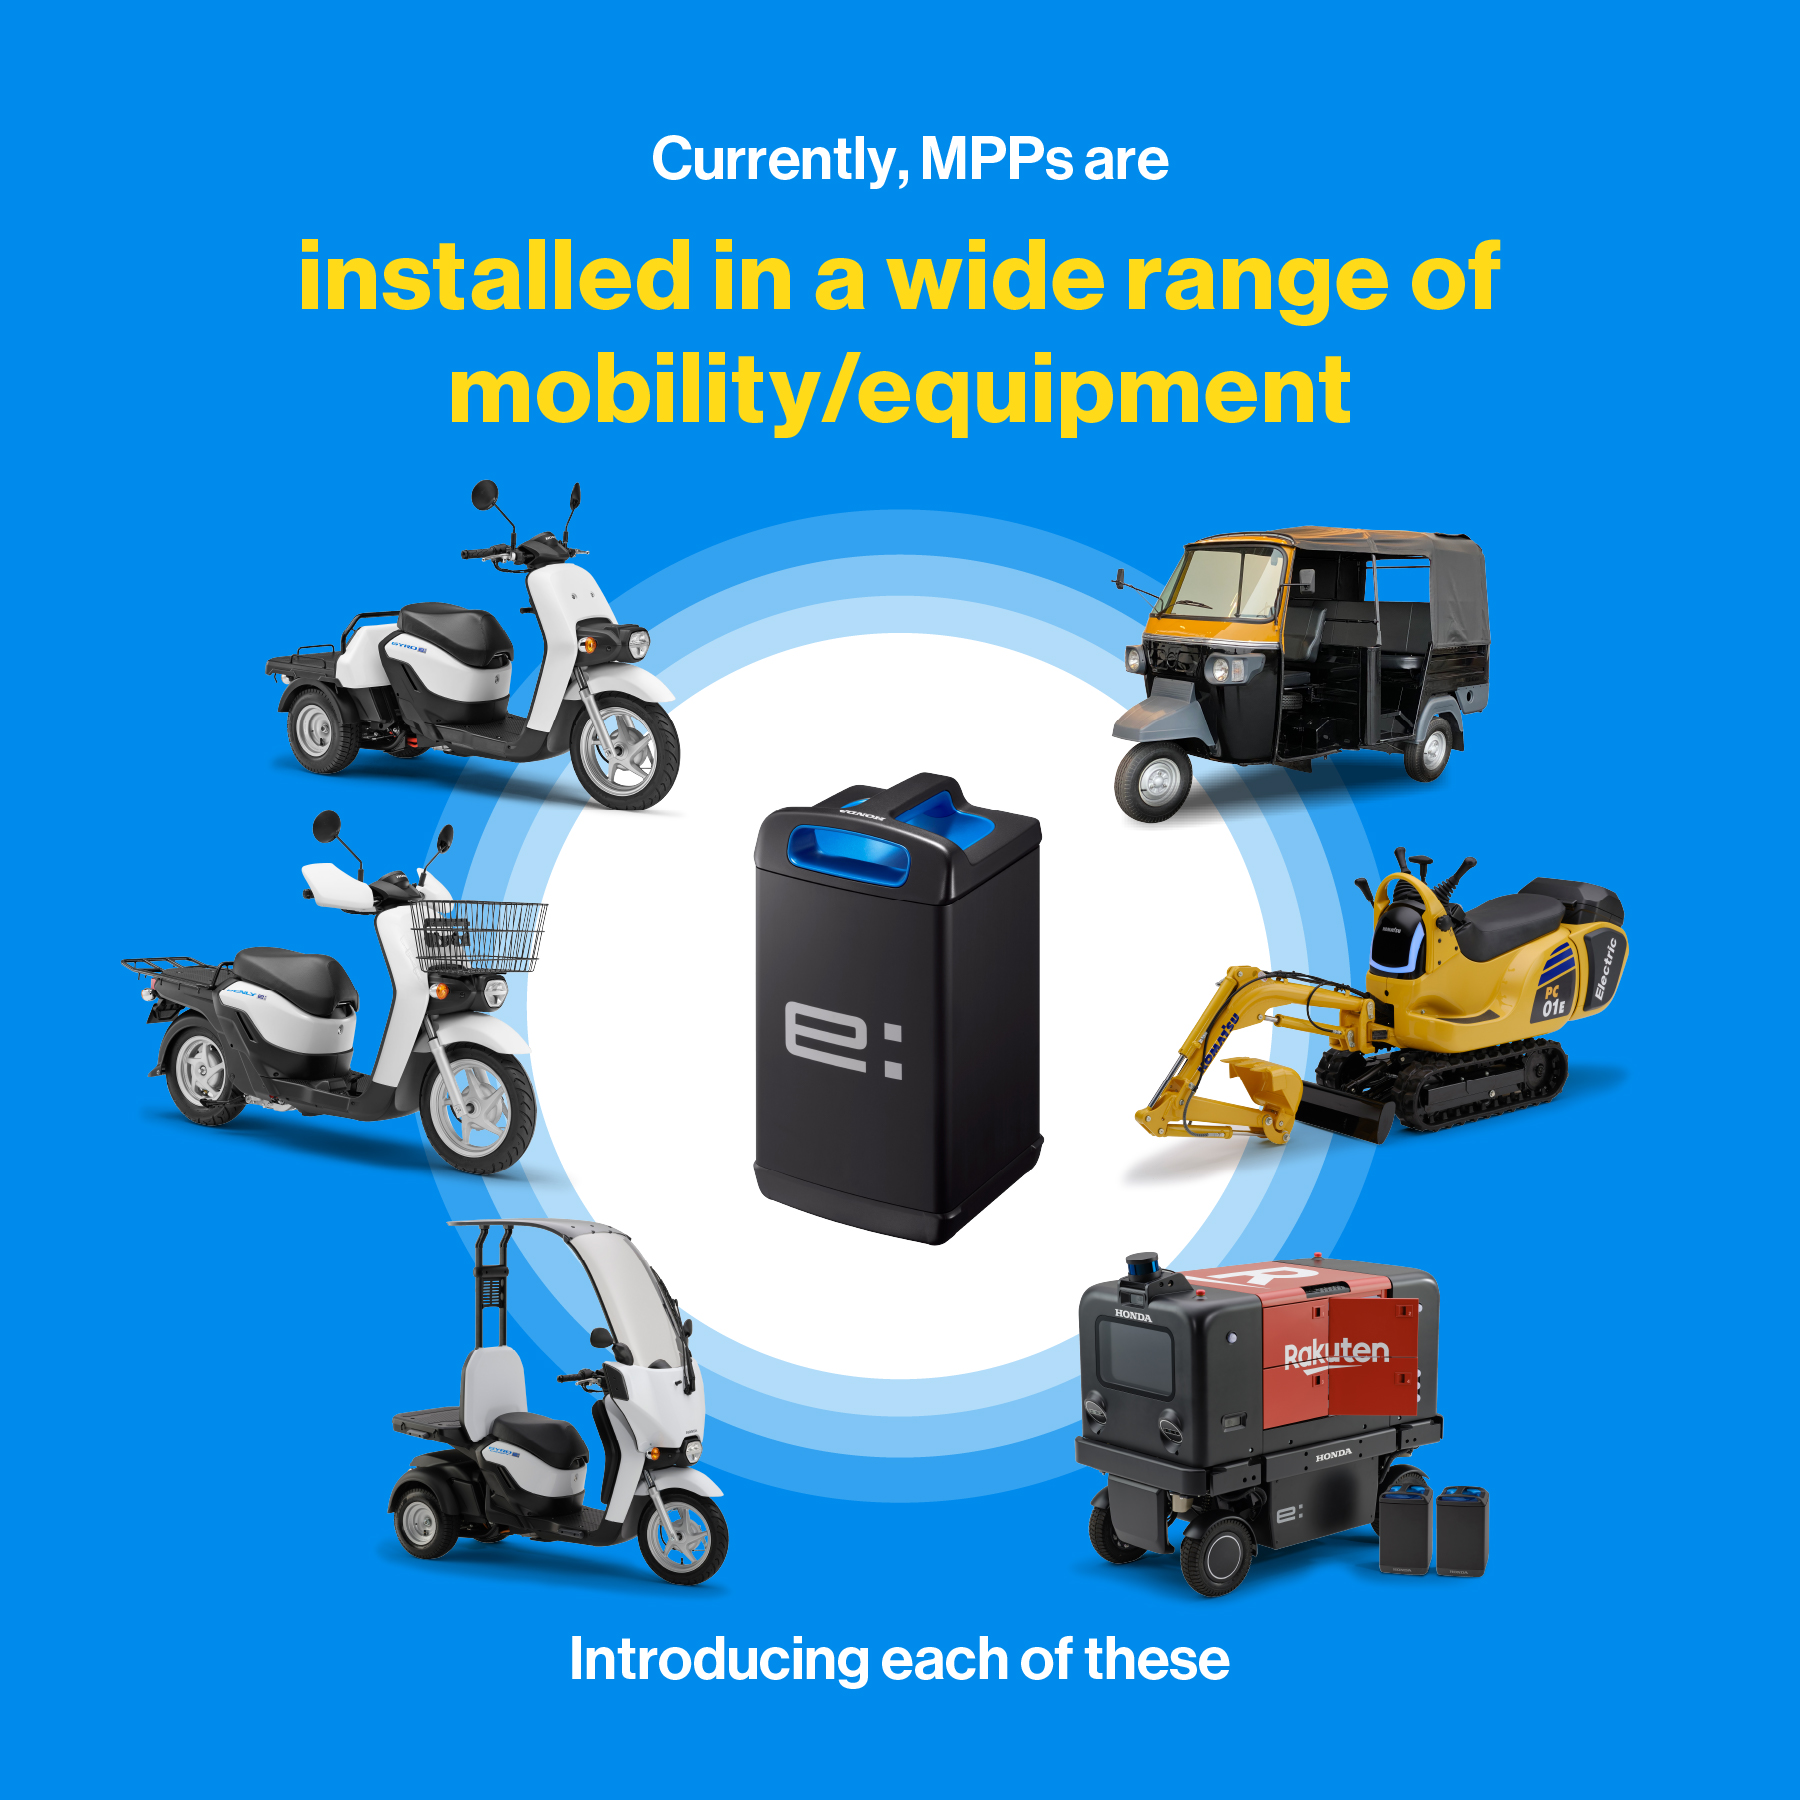 Honda's Mobile Power Pack is installed in a wide range of mobility vehicles and equipment